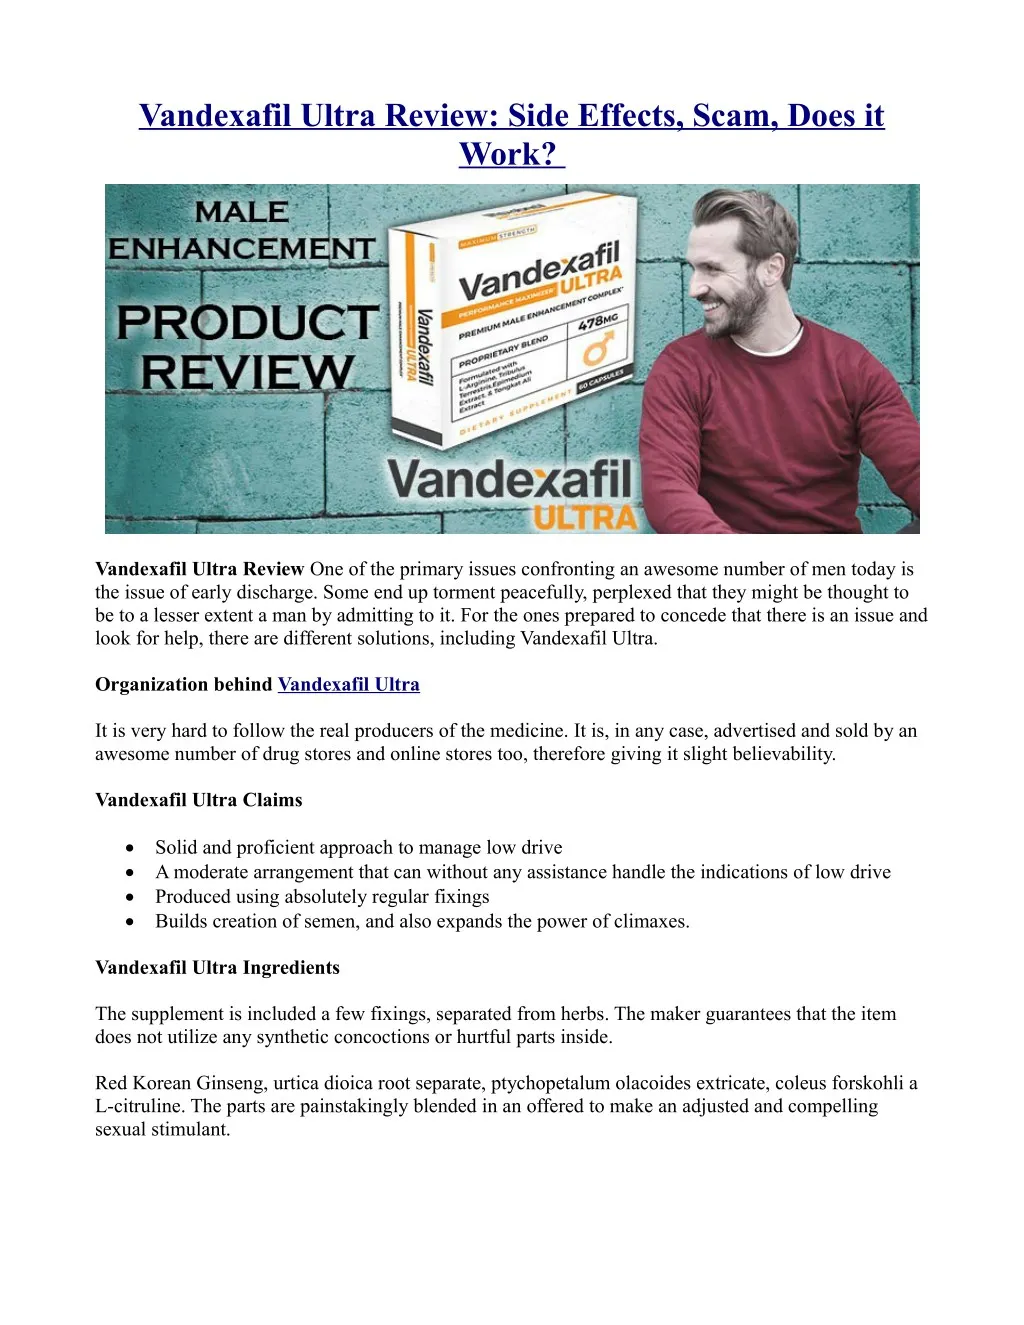 vandexafil ultra review side effects scam does